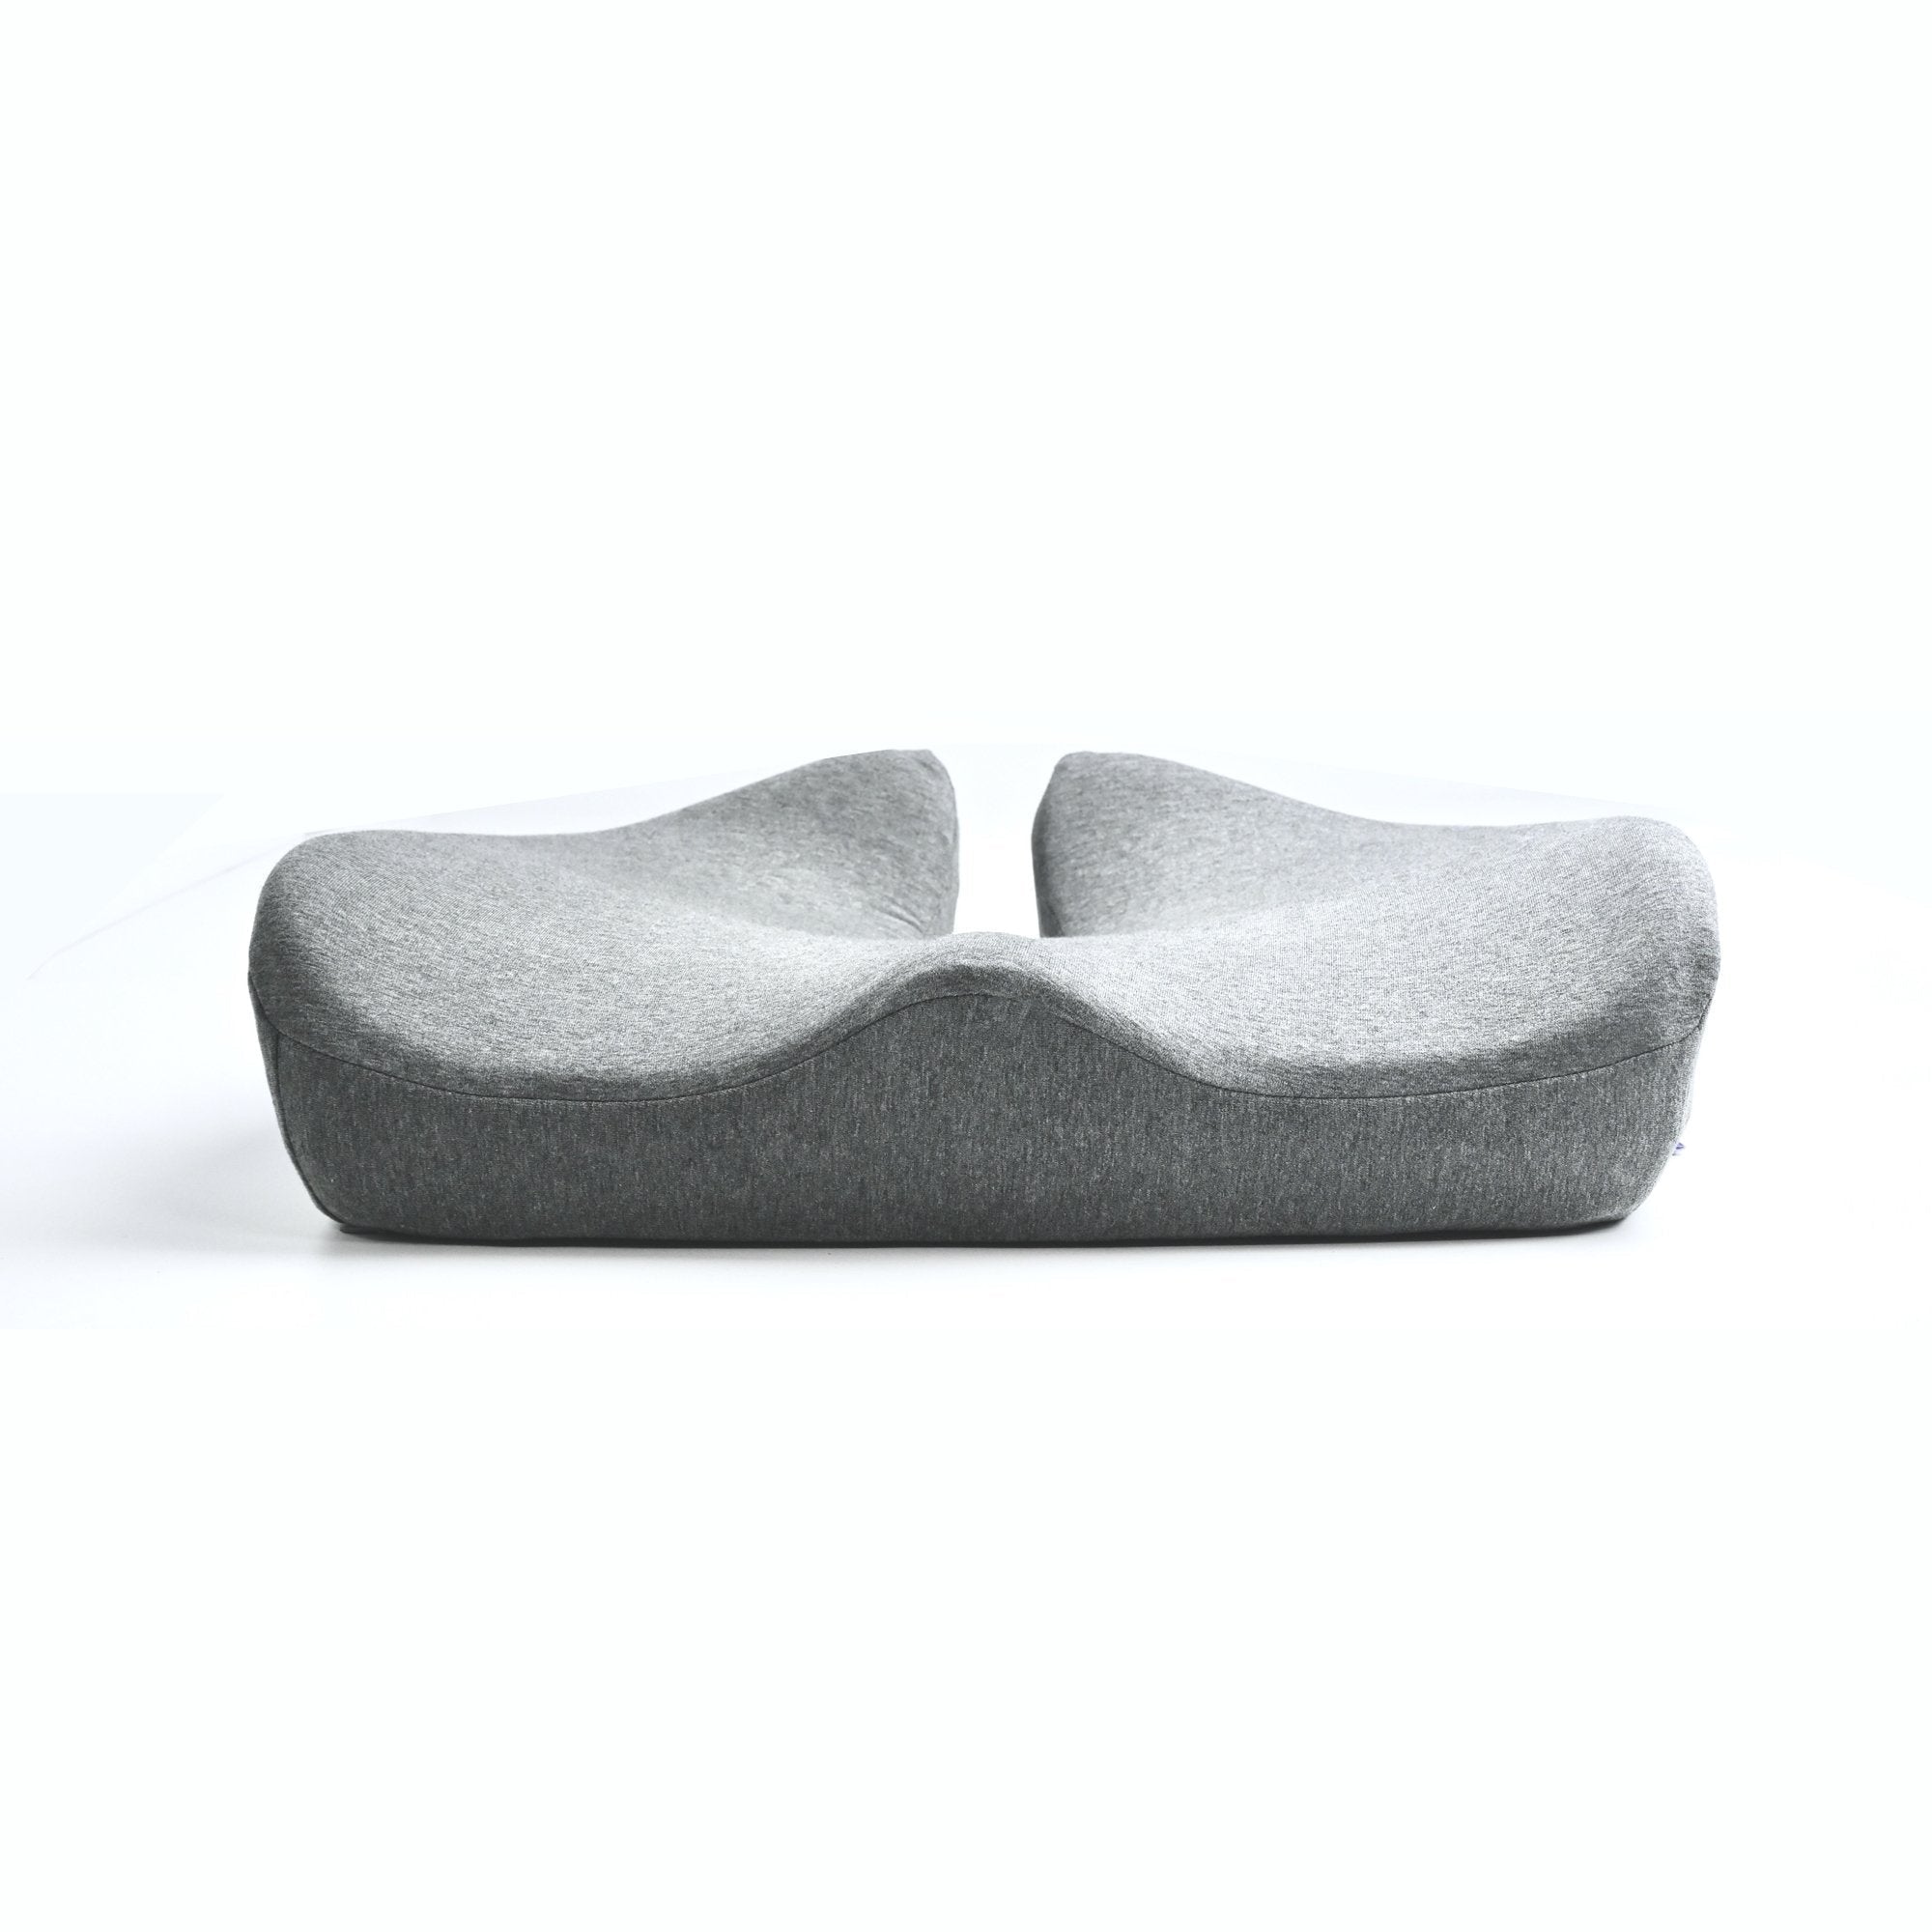 Cushion Lab Pressure Relief Seat Cushion for Long Sitting Hrs Memory Foam  Gray A 